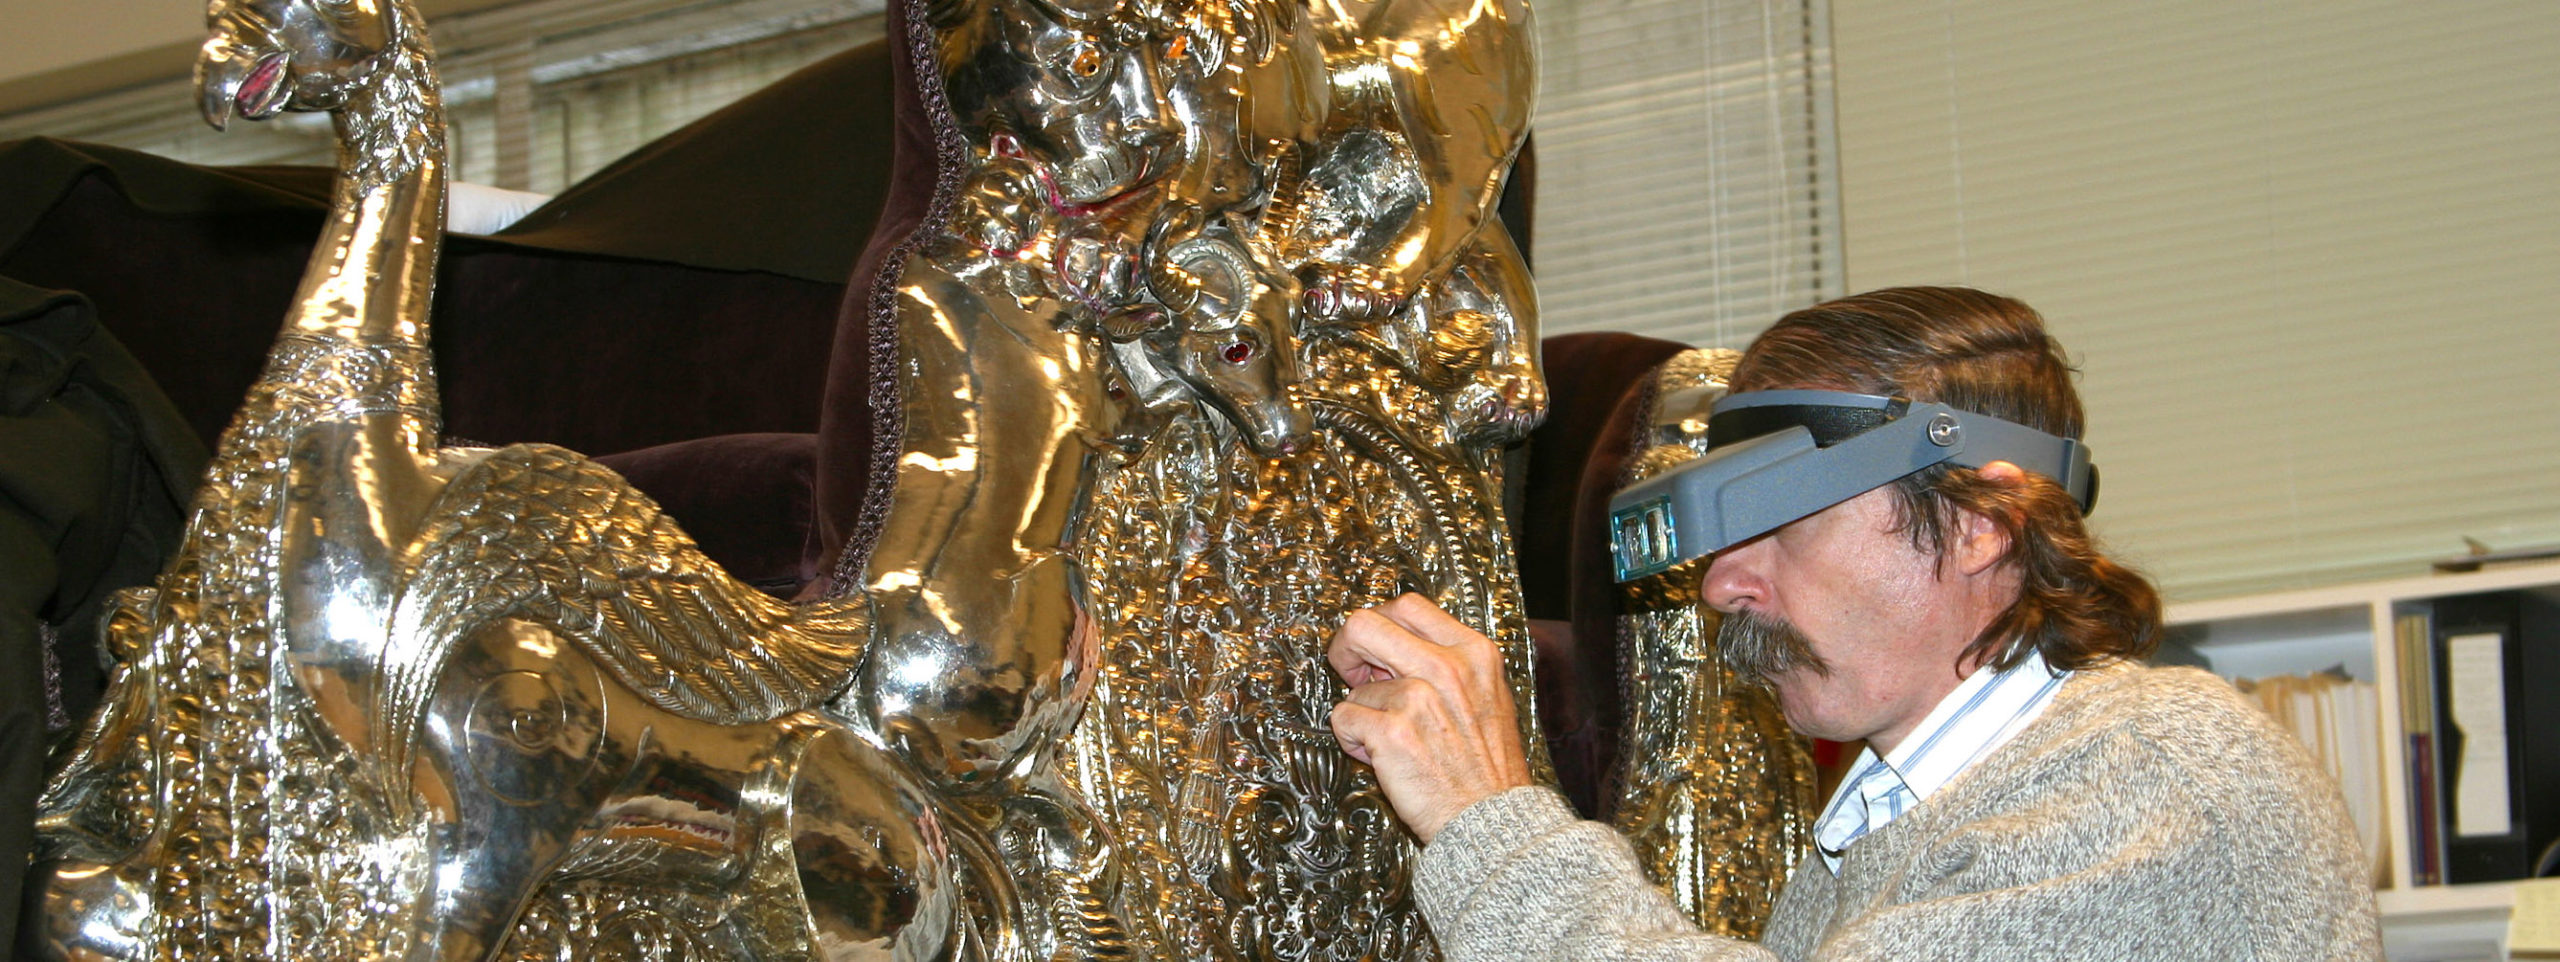 A conservator works on an elaborate silver howdah.